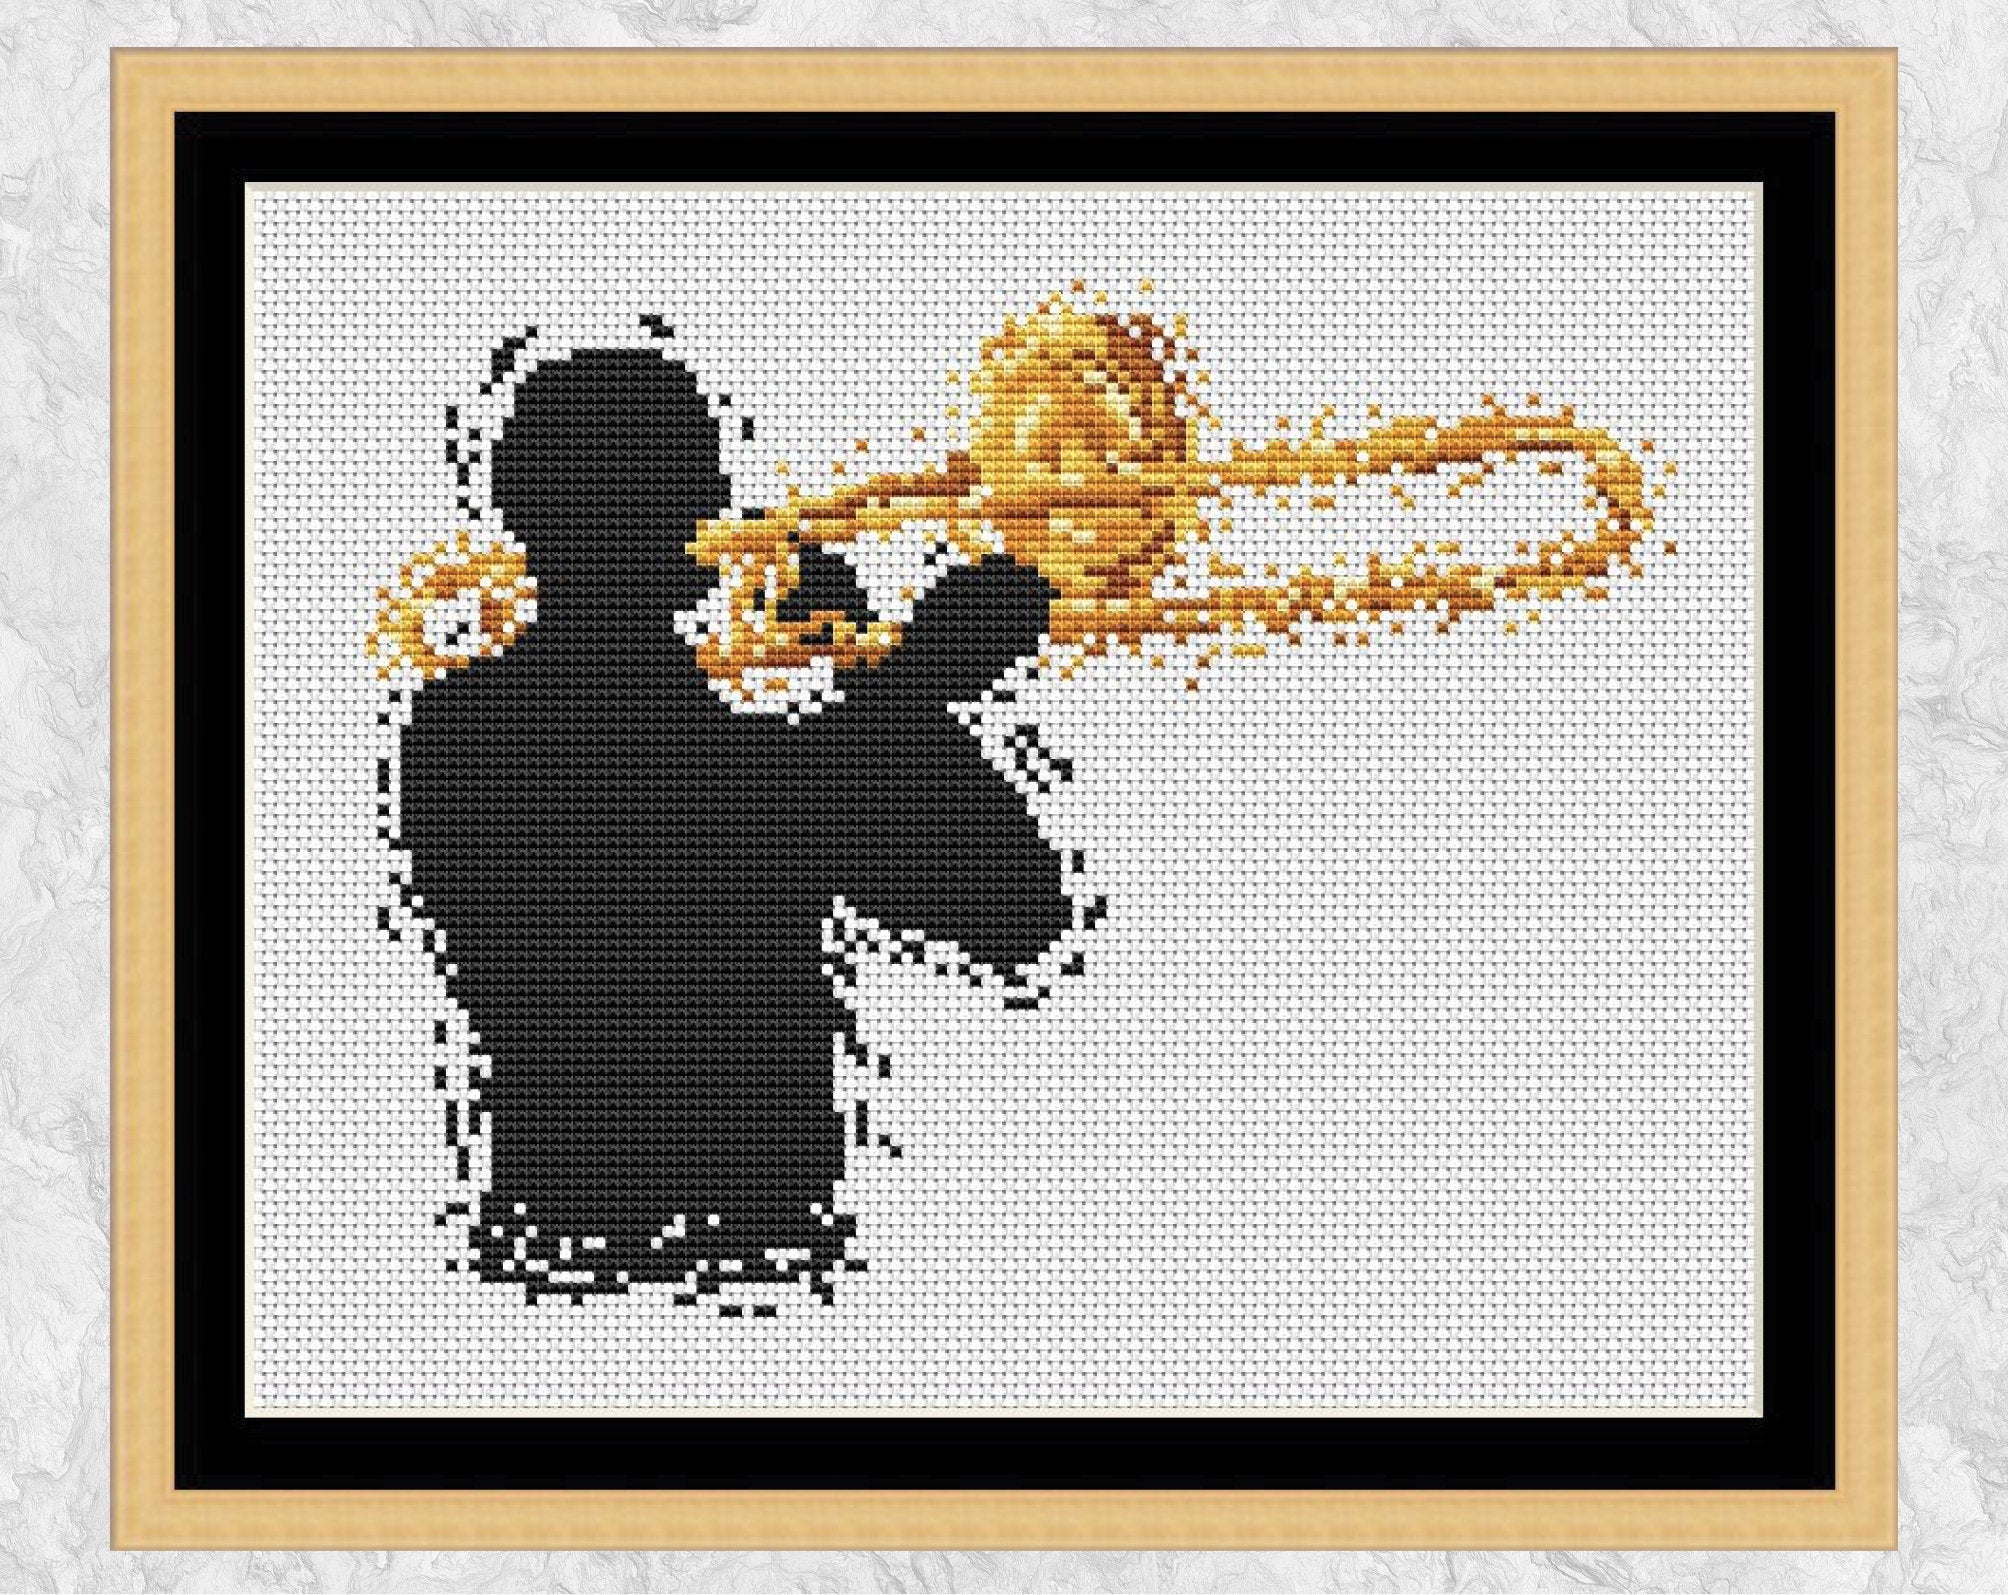 Modern art cross stitch pattern of a male trombonist. Shown with frame.